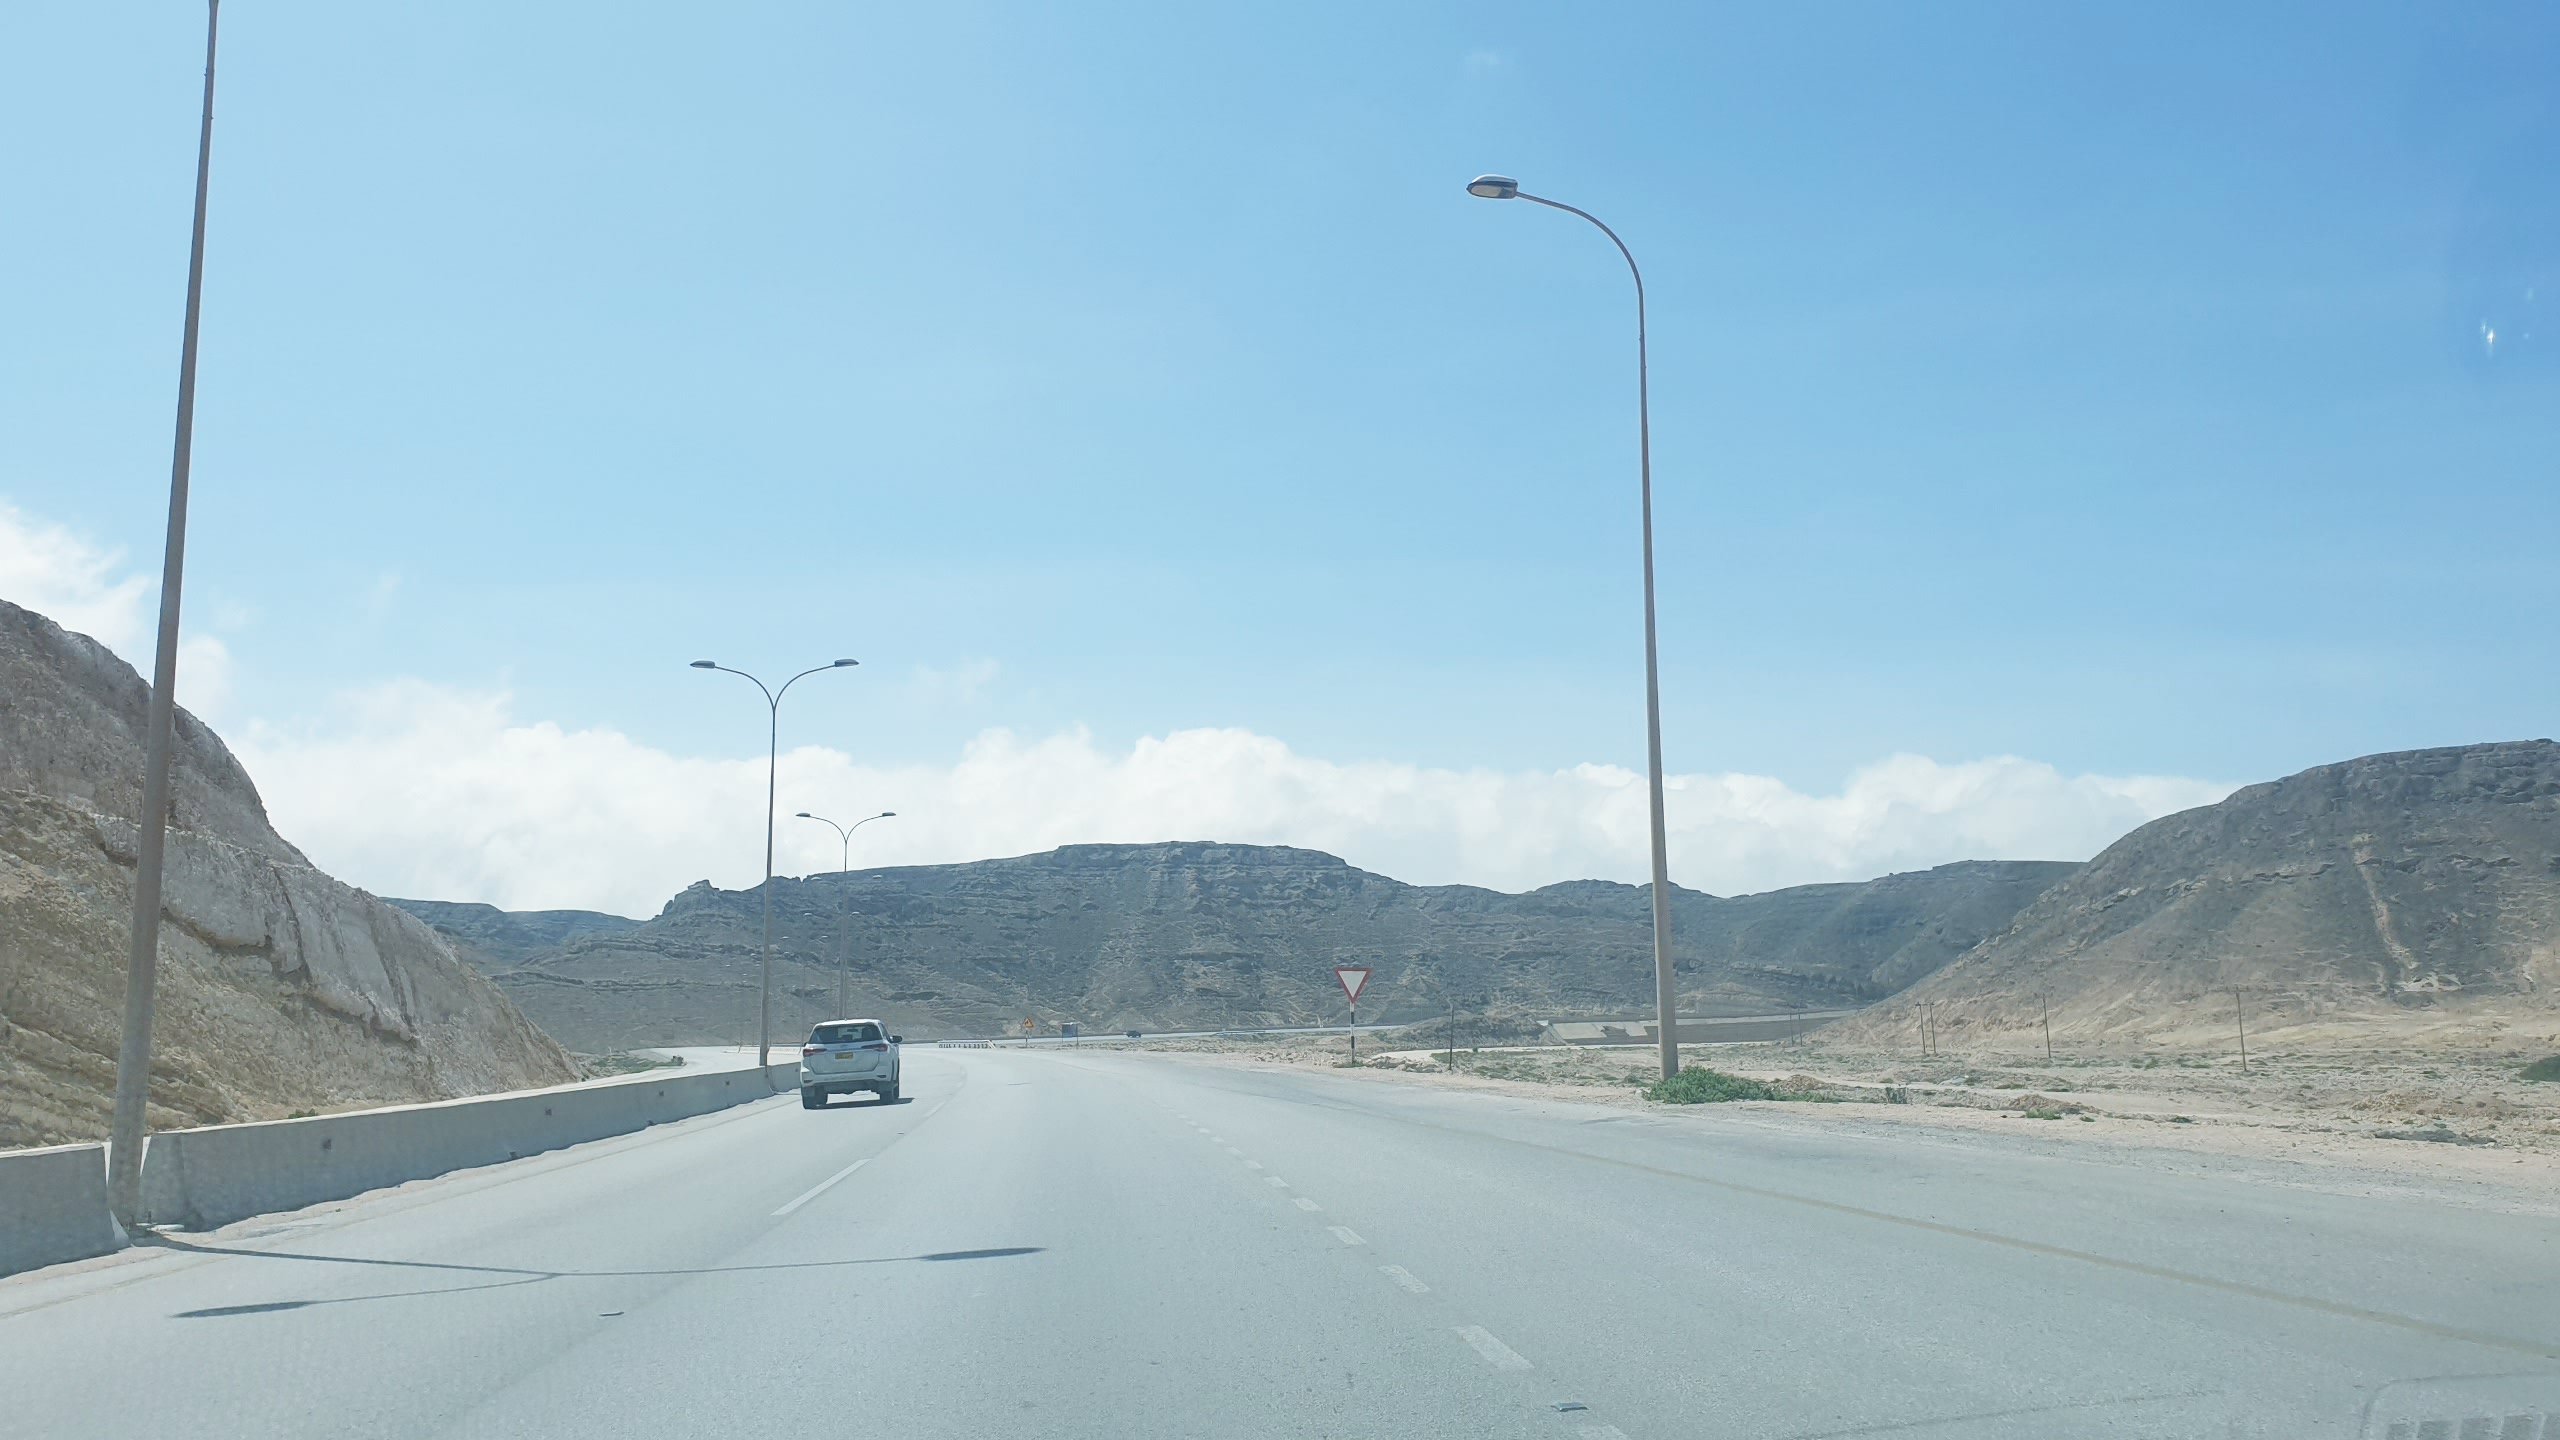 he Al Qara Mountains salalah while coming from Thumrait and Muscat